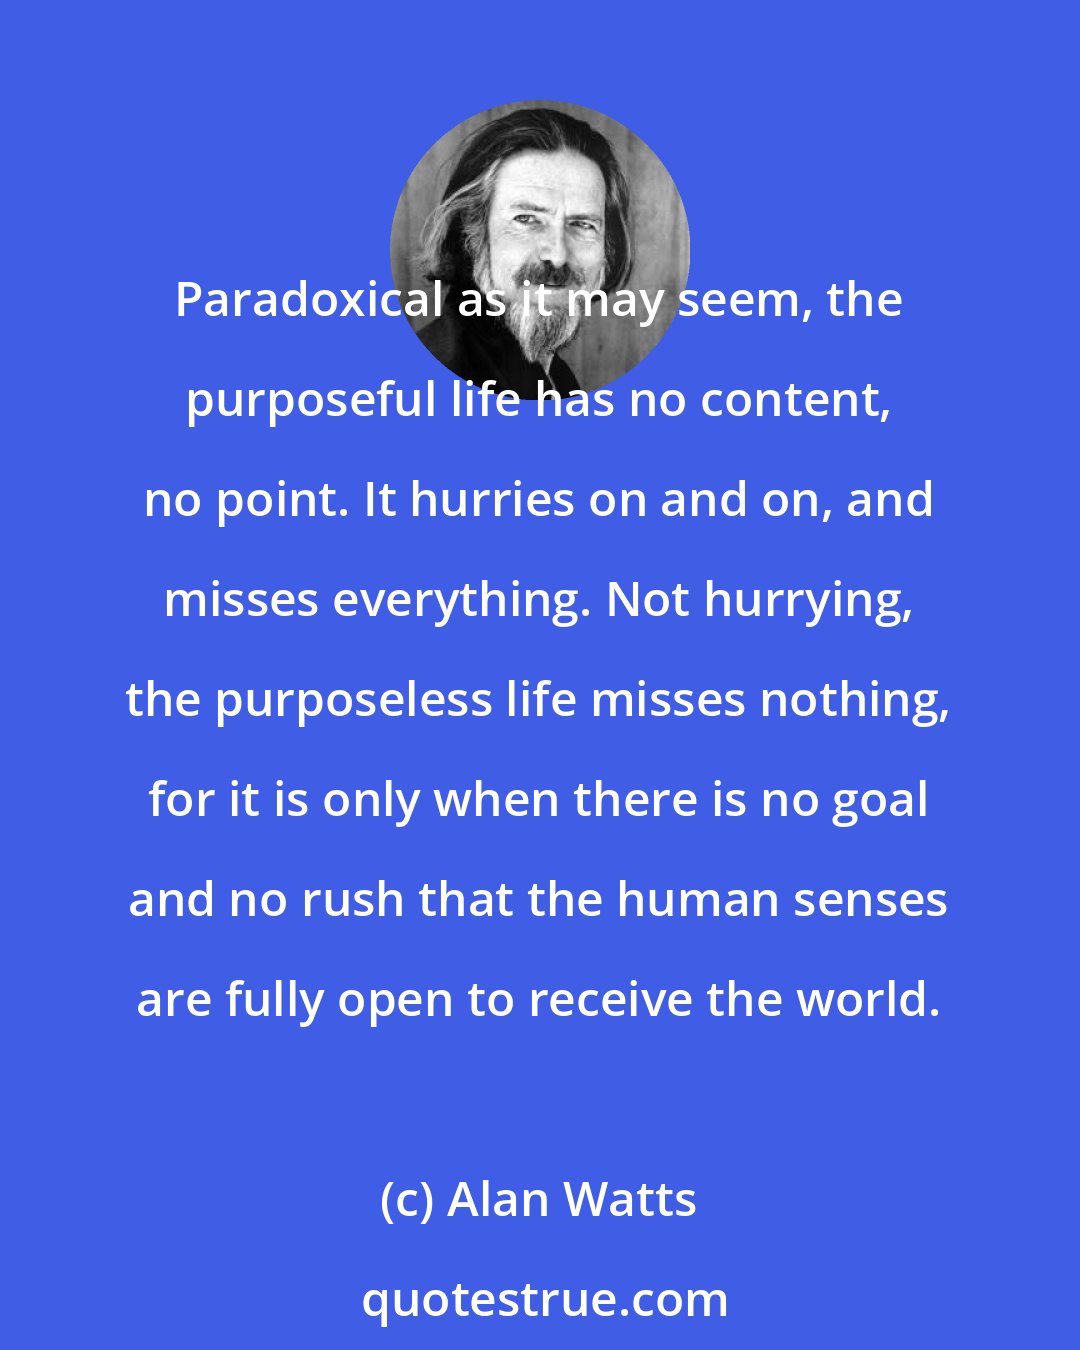 Alan Watts: Paradoxical as it may seem, the purposeful life has no content, no point. It hurries on and on, and misses everything. Not hurrying, the purposeless life misses nothing, for it is only when there is no goal and no rush that the human senses are fully open to receive the world.